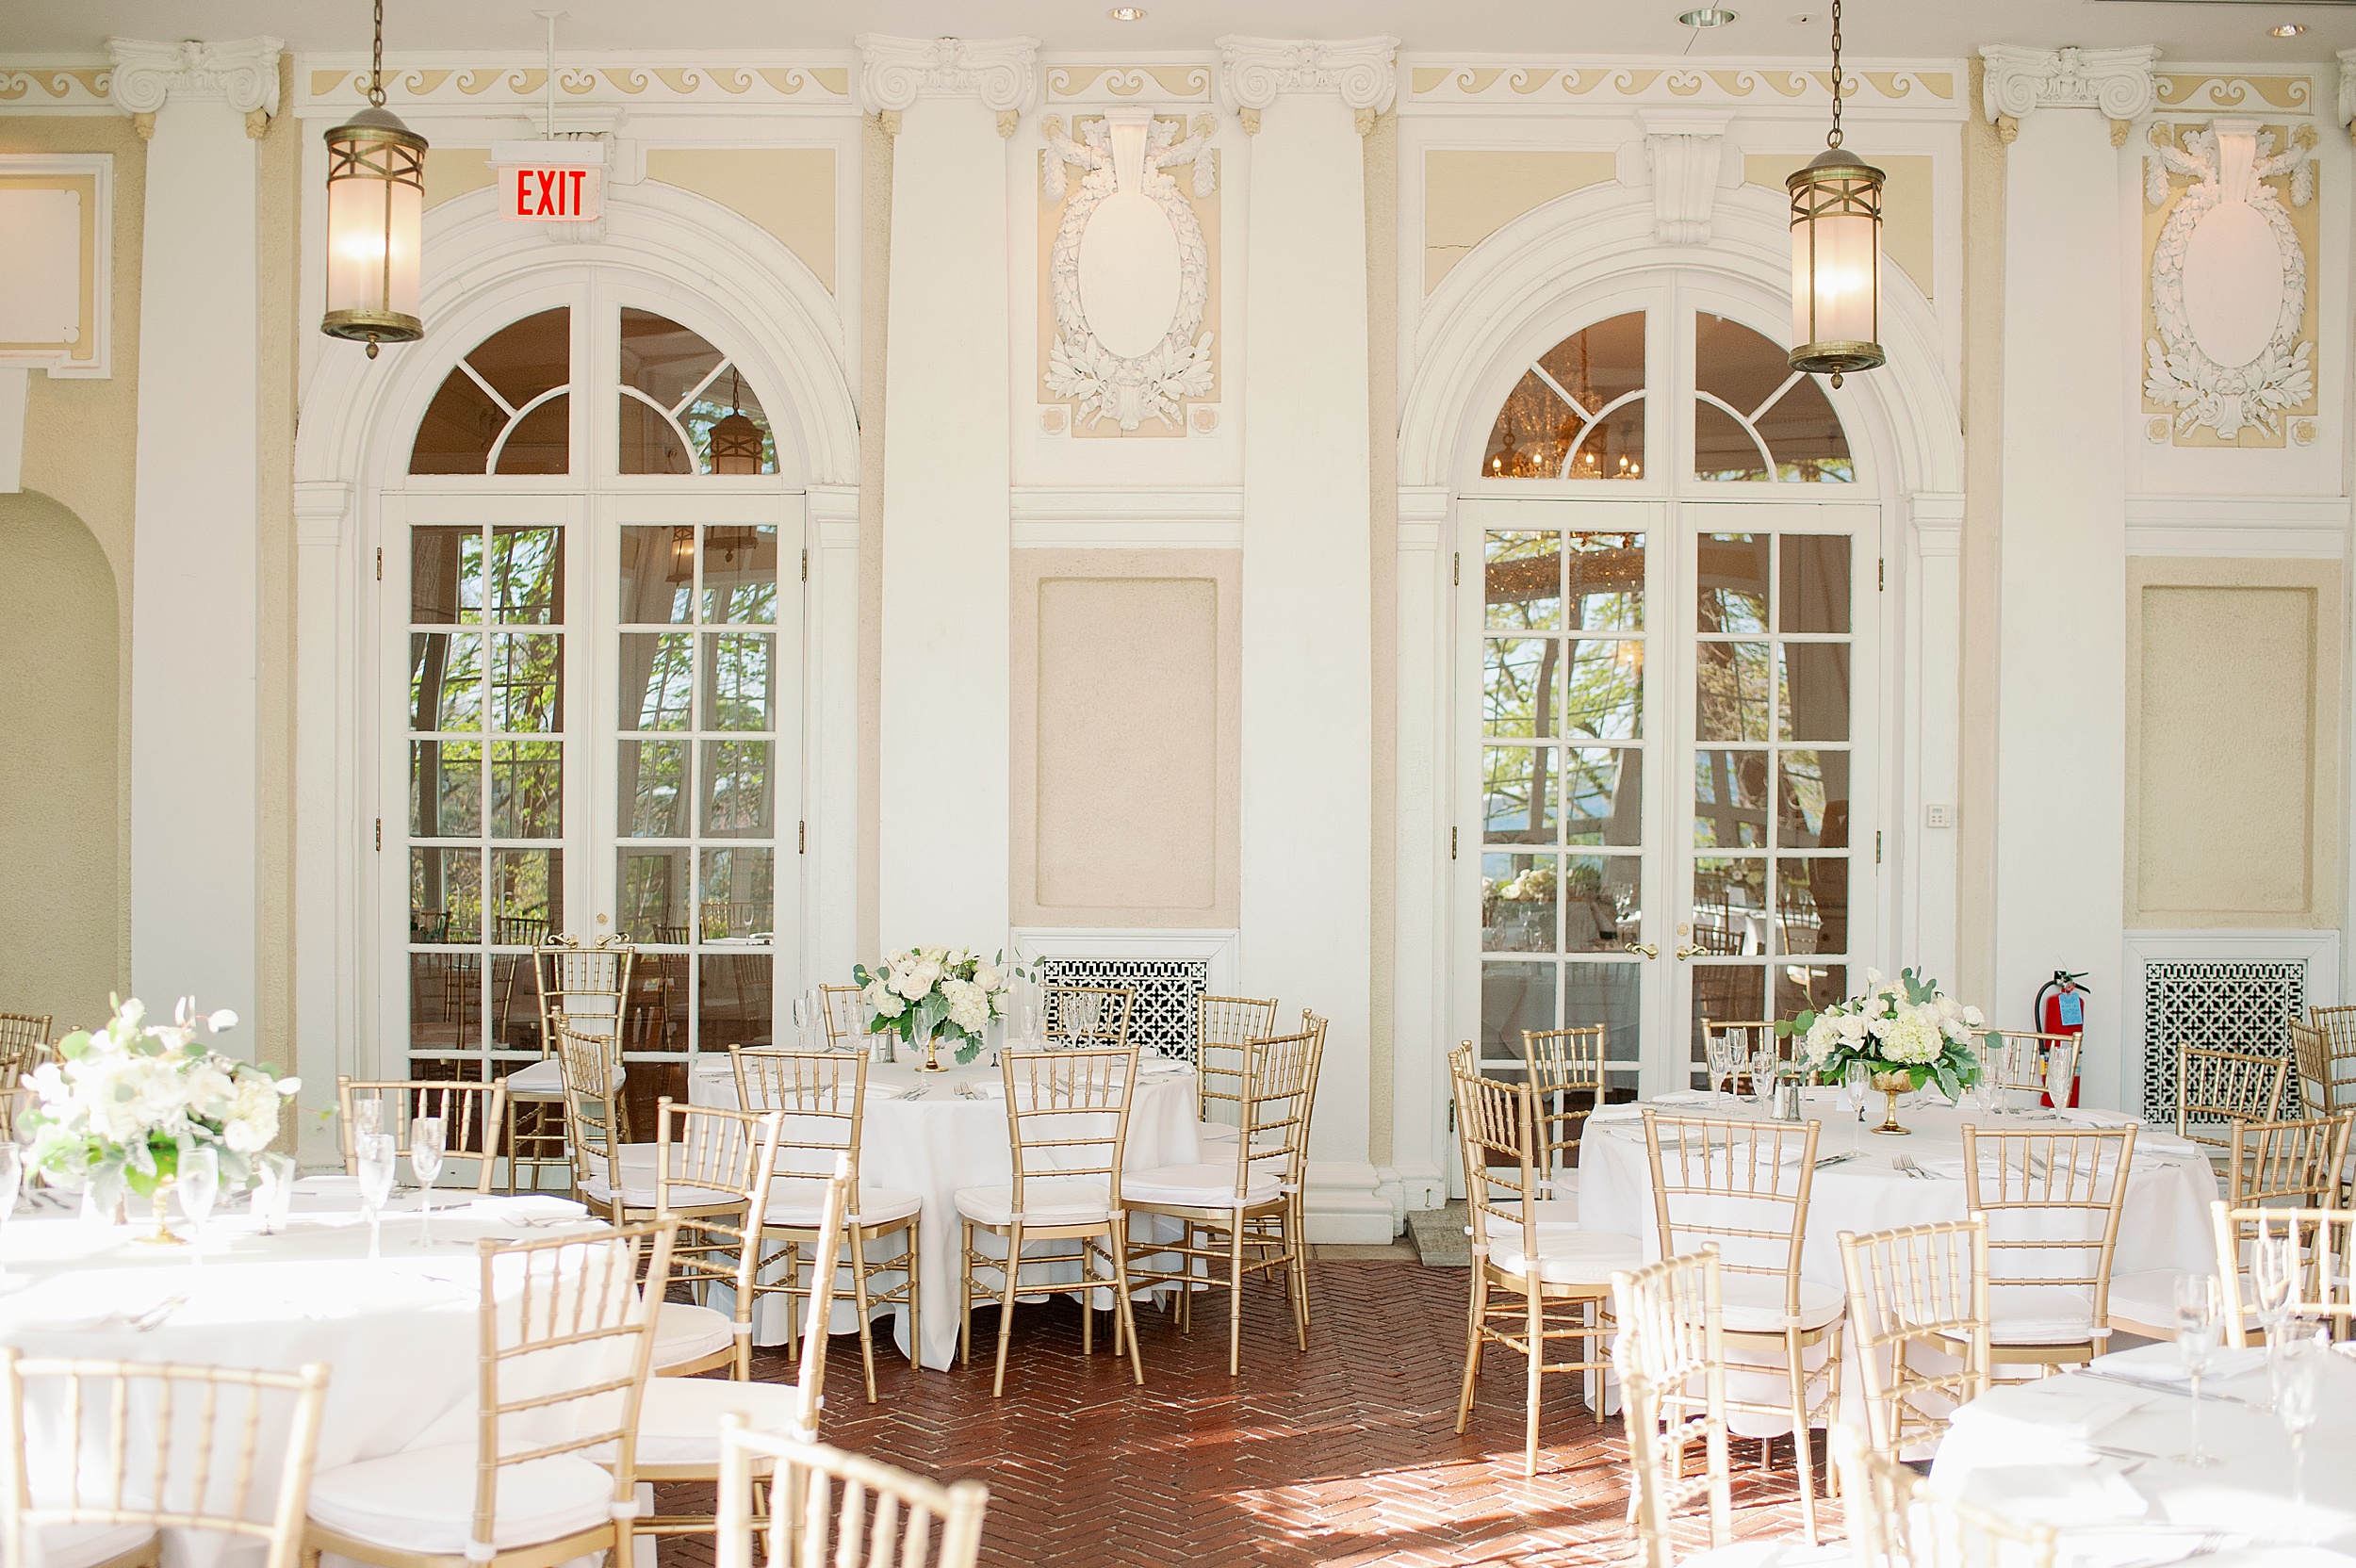 Tupper Manor Conservatory wedding details white flowers and greenery